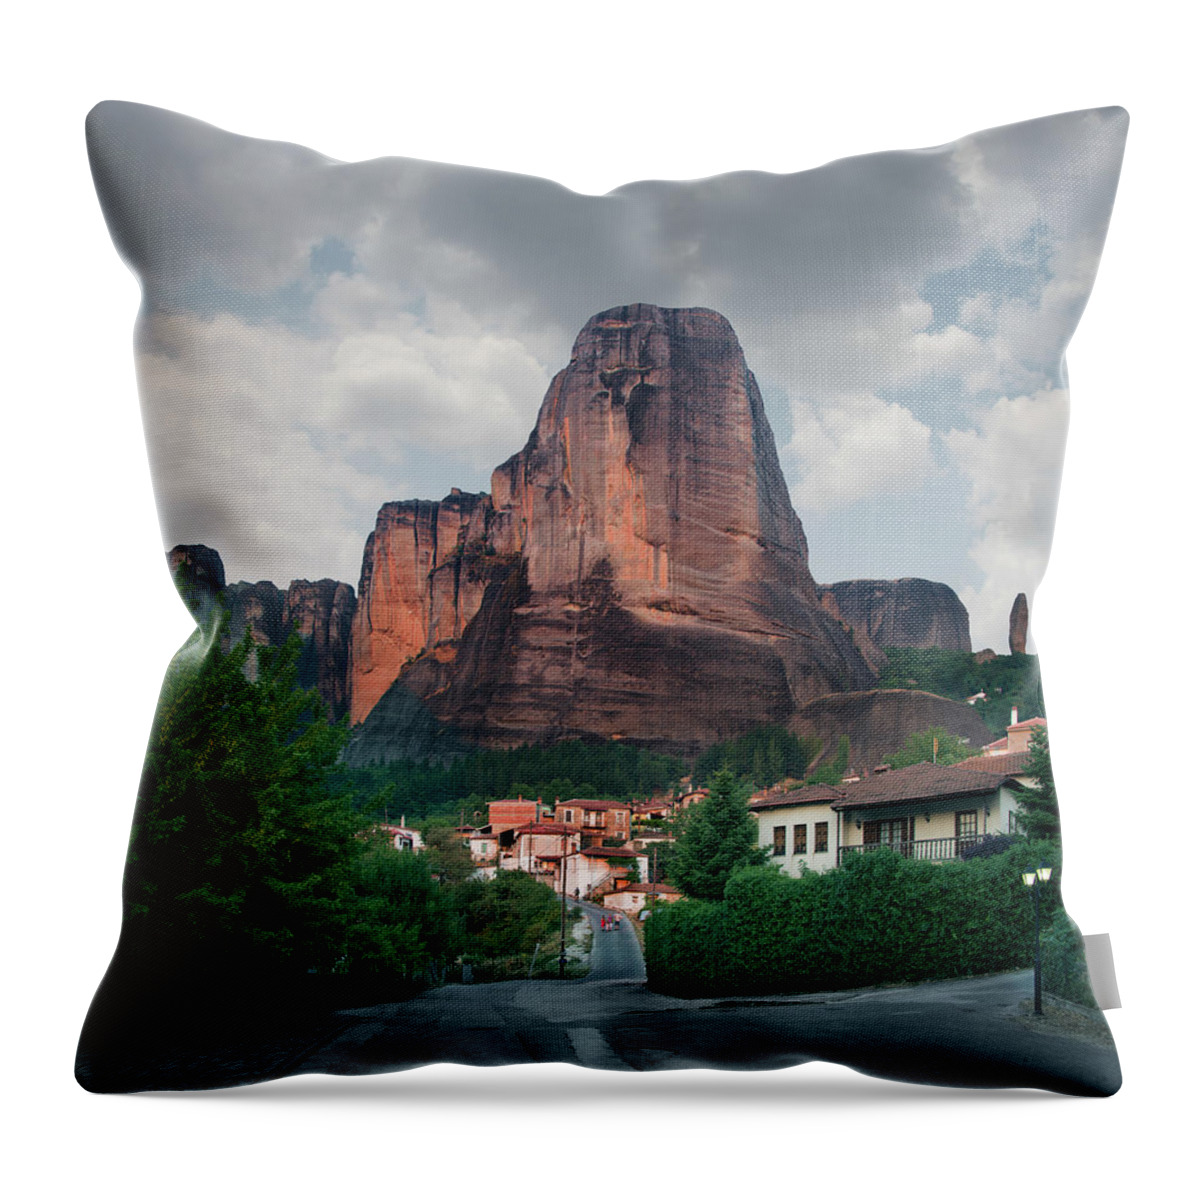 Tranquility Throw Pillow featuring the photograph Rock Formations In The Meteora, Greece by Ed Freeman